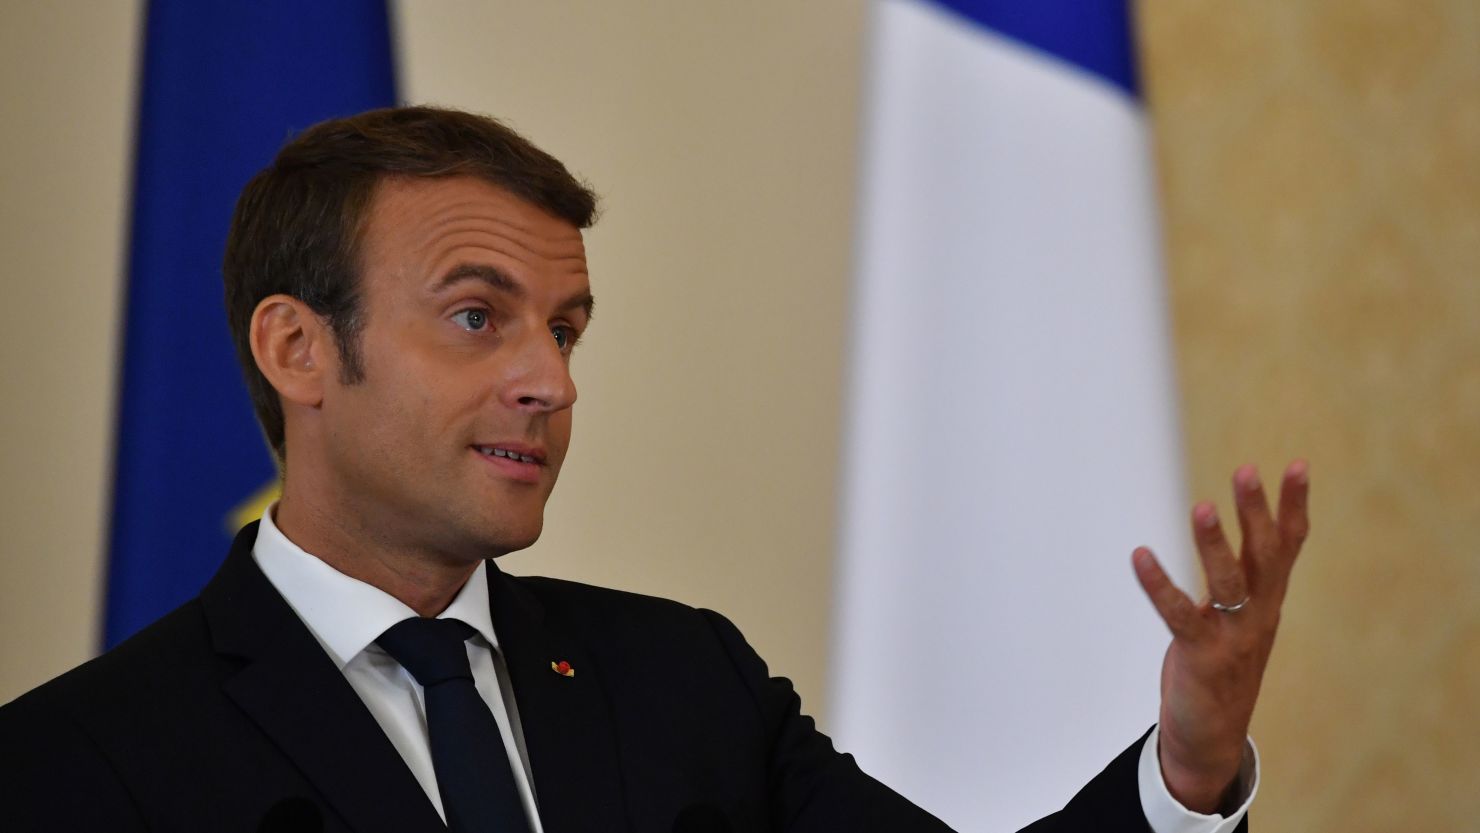 French President Emmanuel Macron speaks at a news conference on August 24.